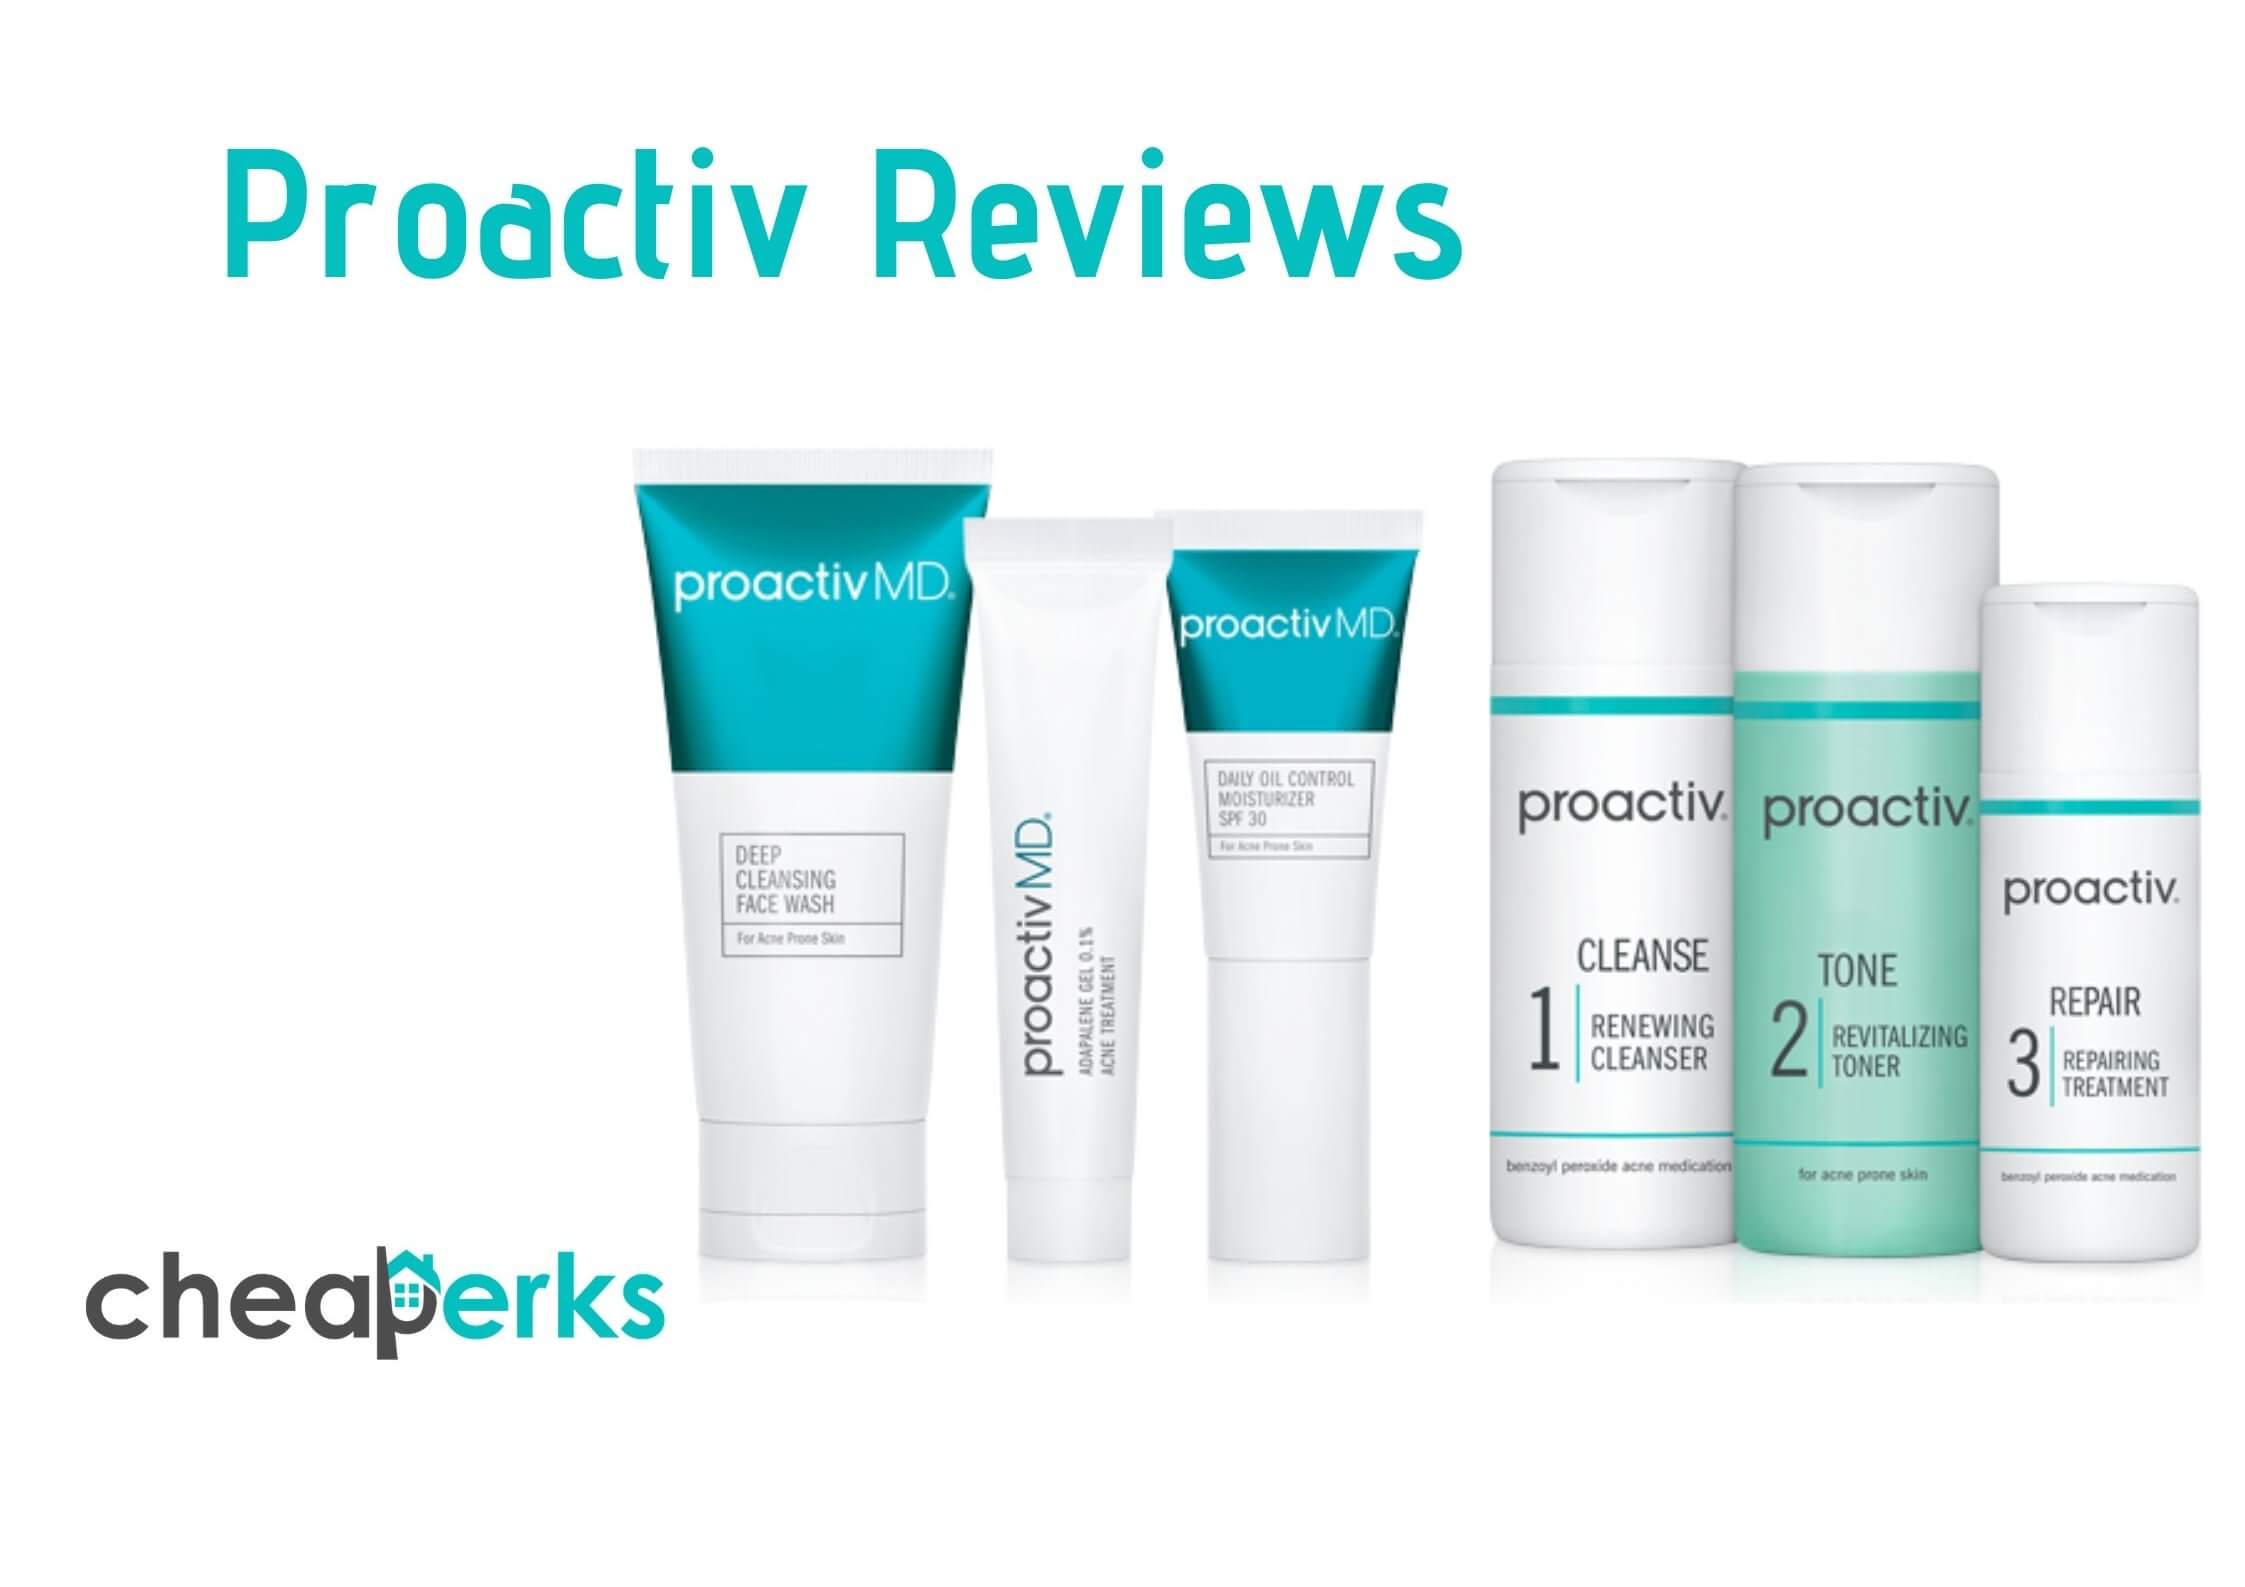 Proactiv Reviews Are Proactiv Products worth Purchasing? Full Review